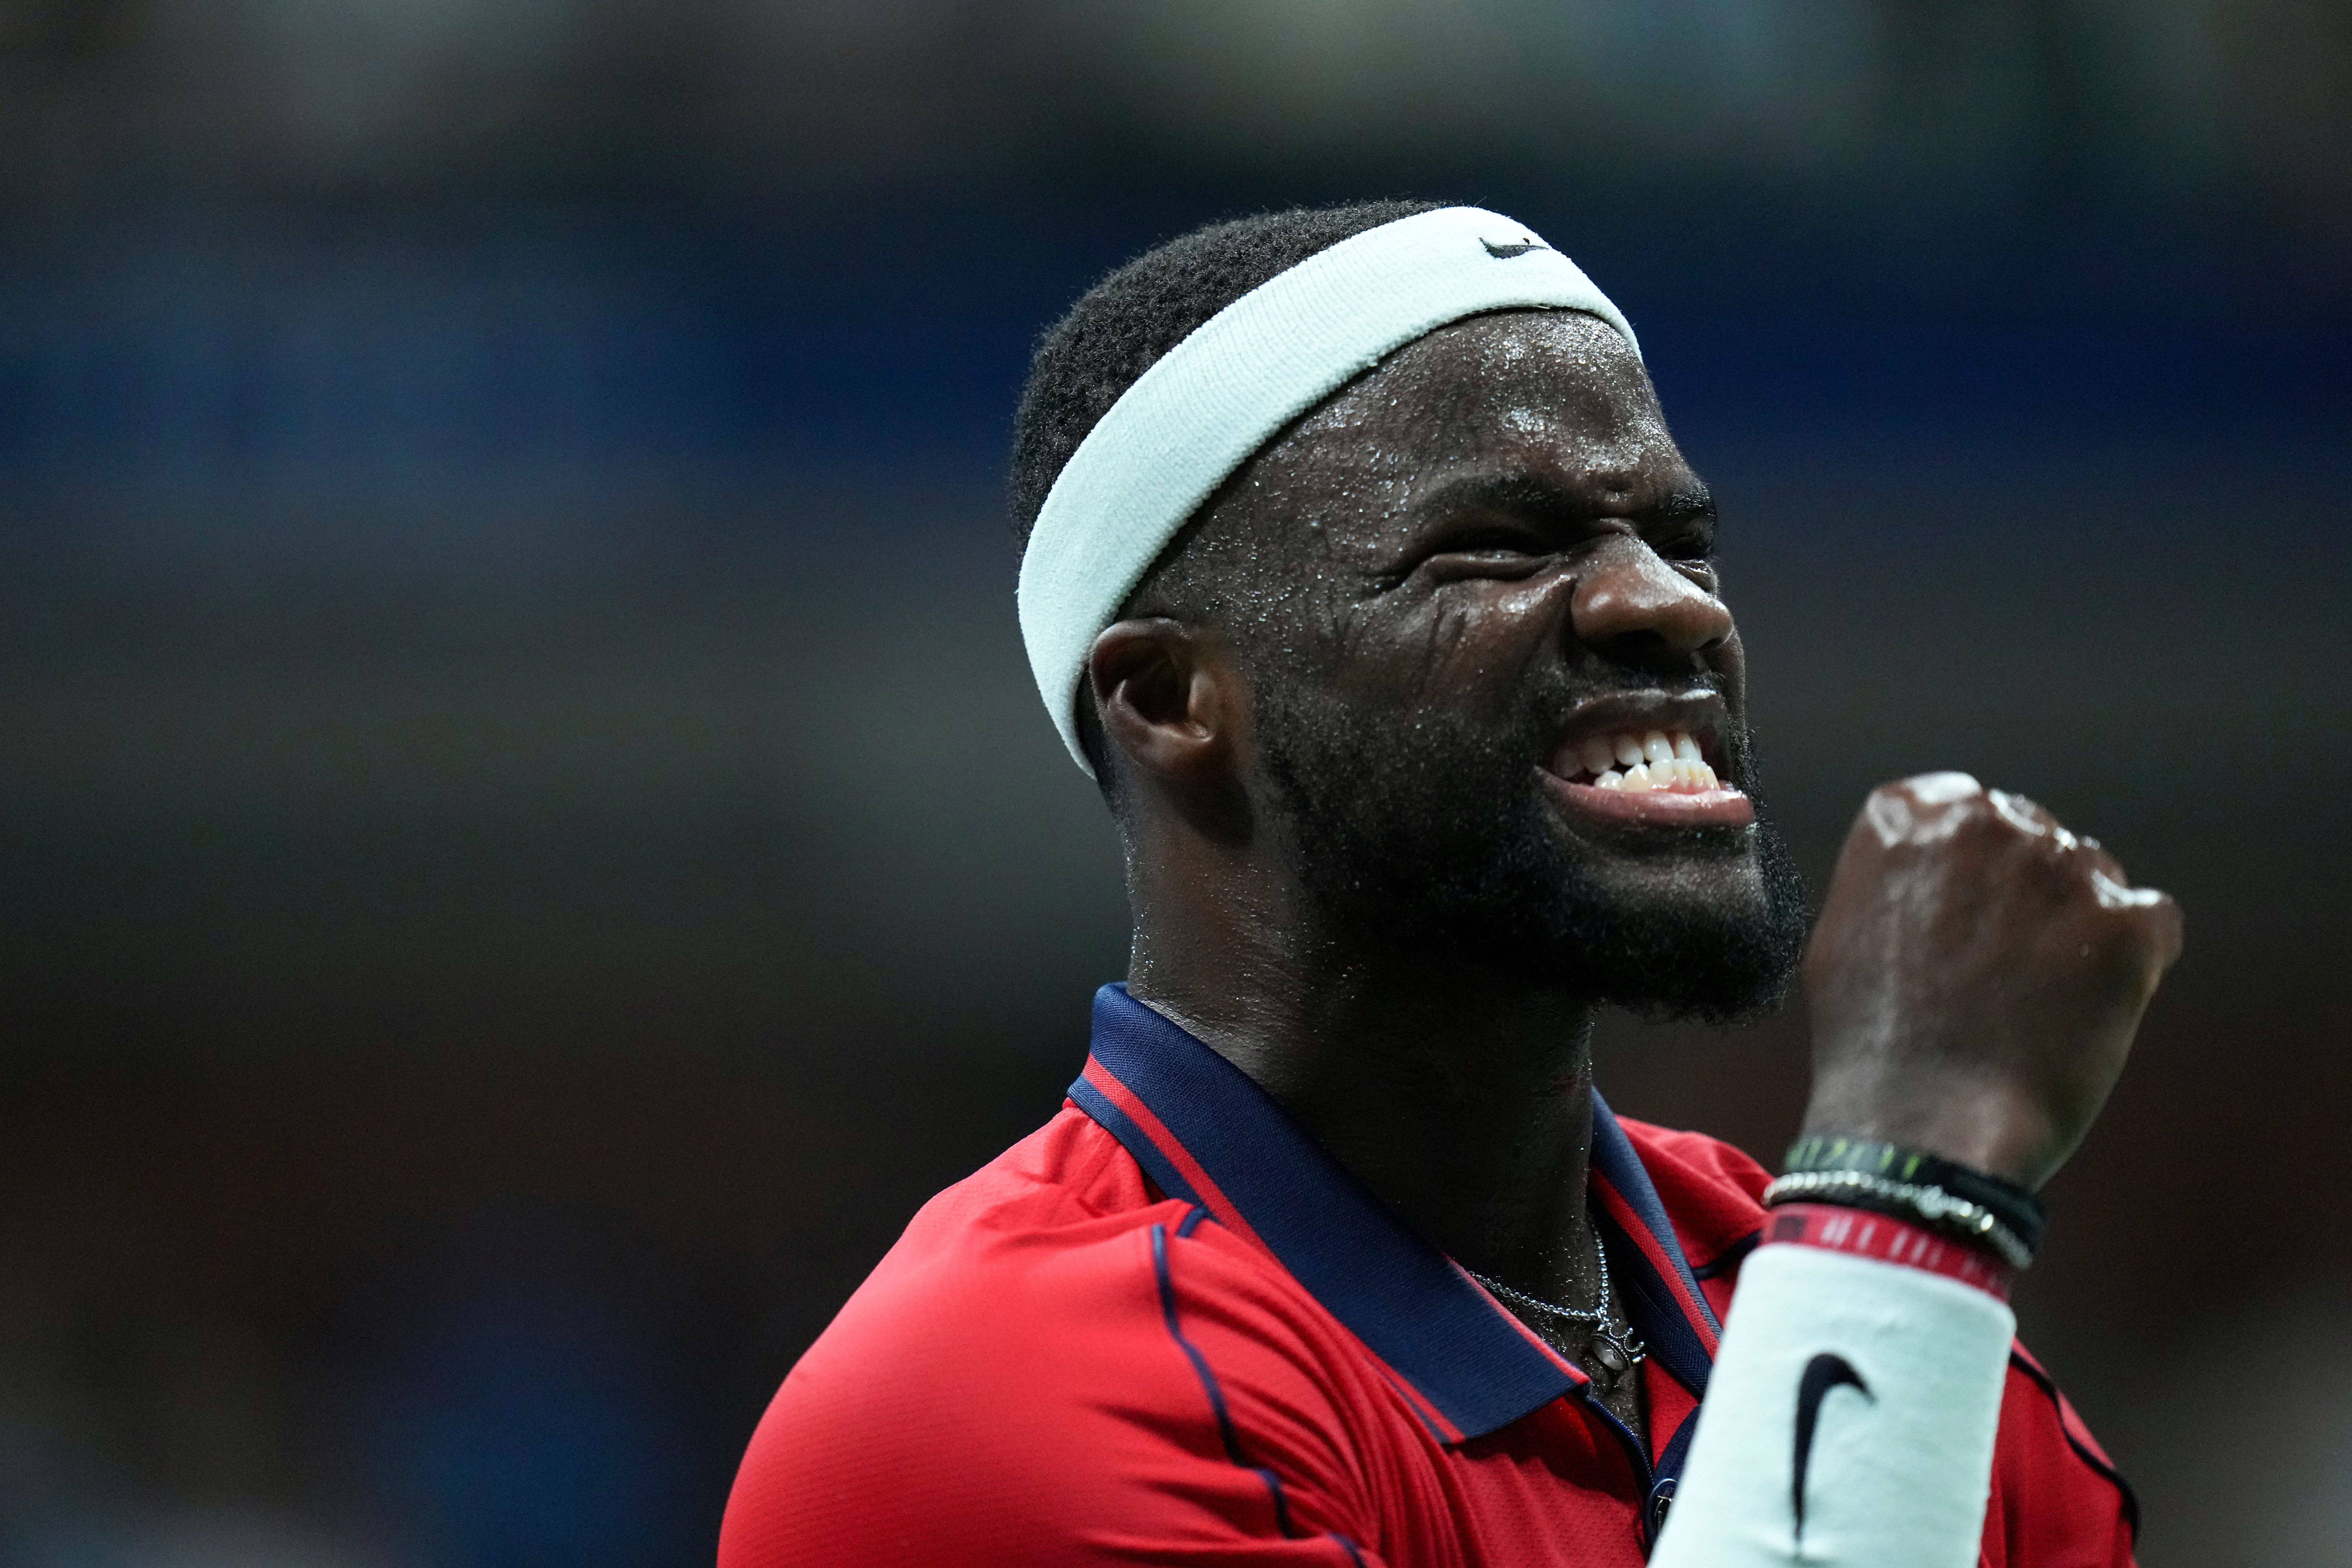 Absence of Federer, Nadal extra motivation at US Open, says Tiafoe